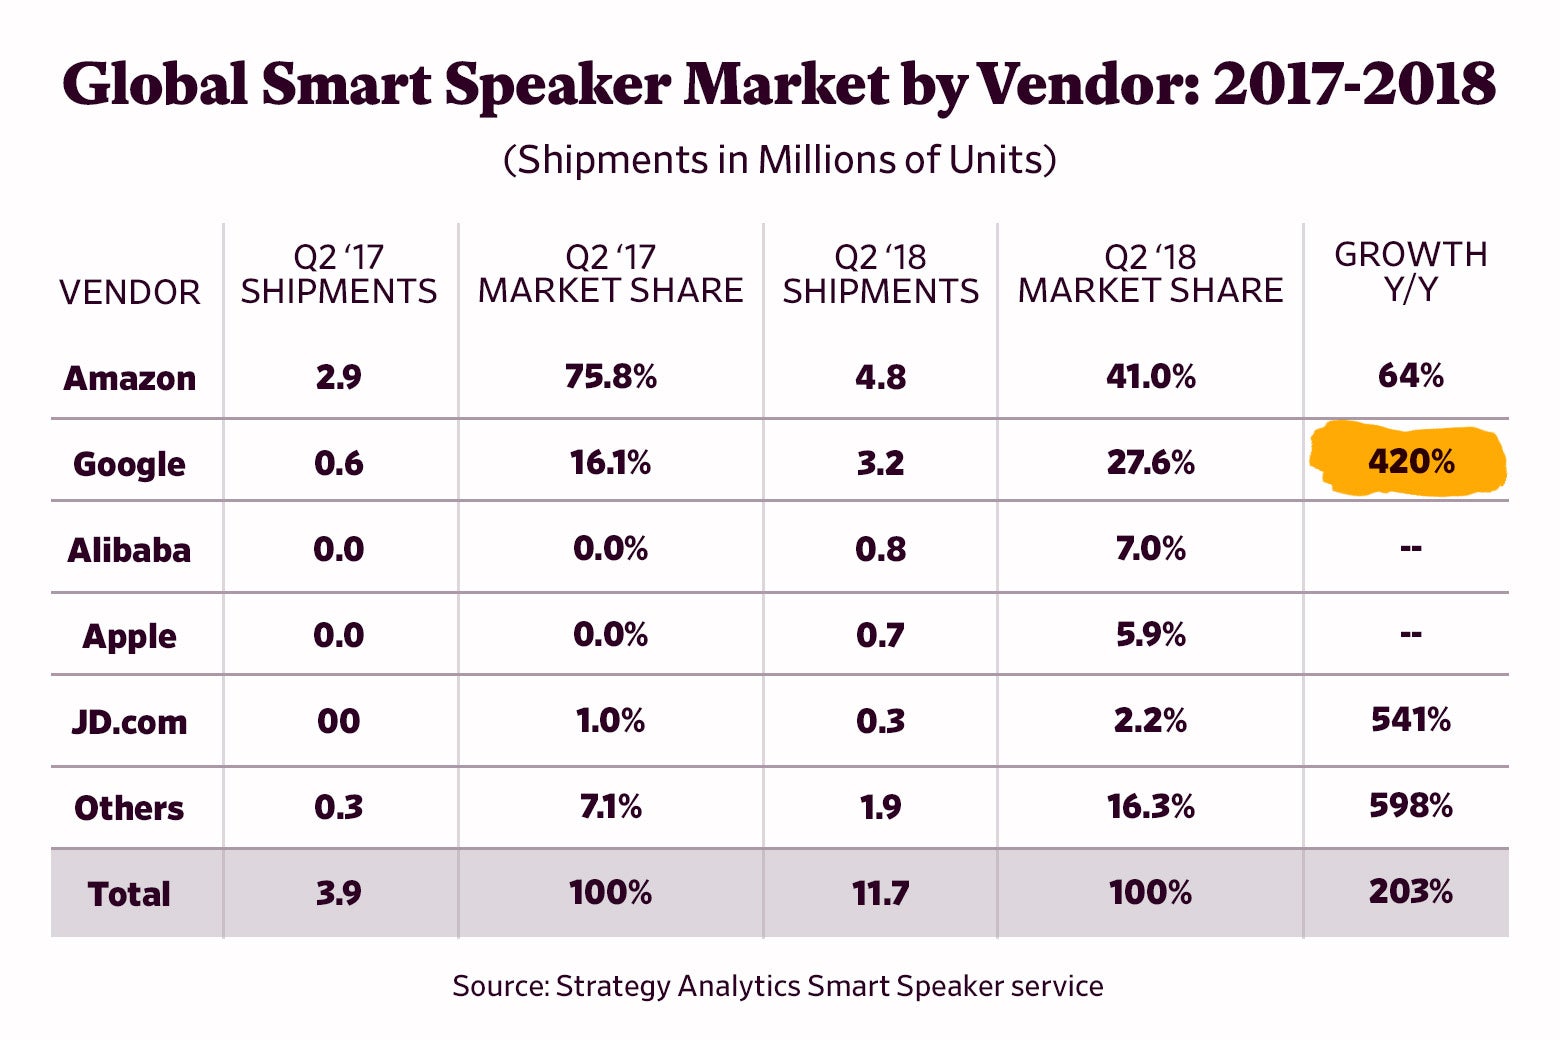 Global smart speaker market growth from 2017 to 2018.